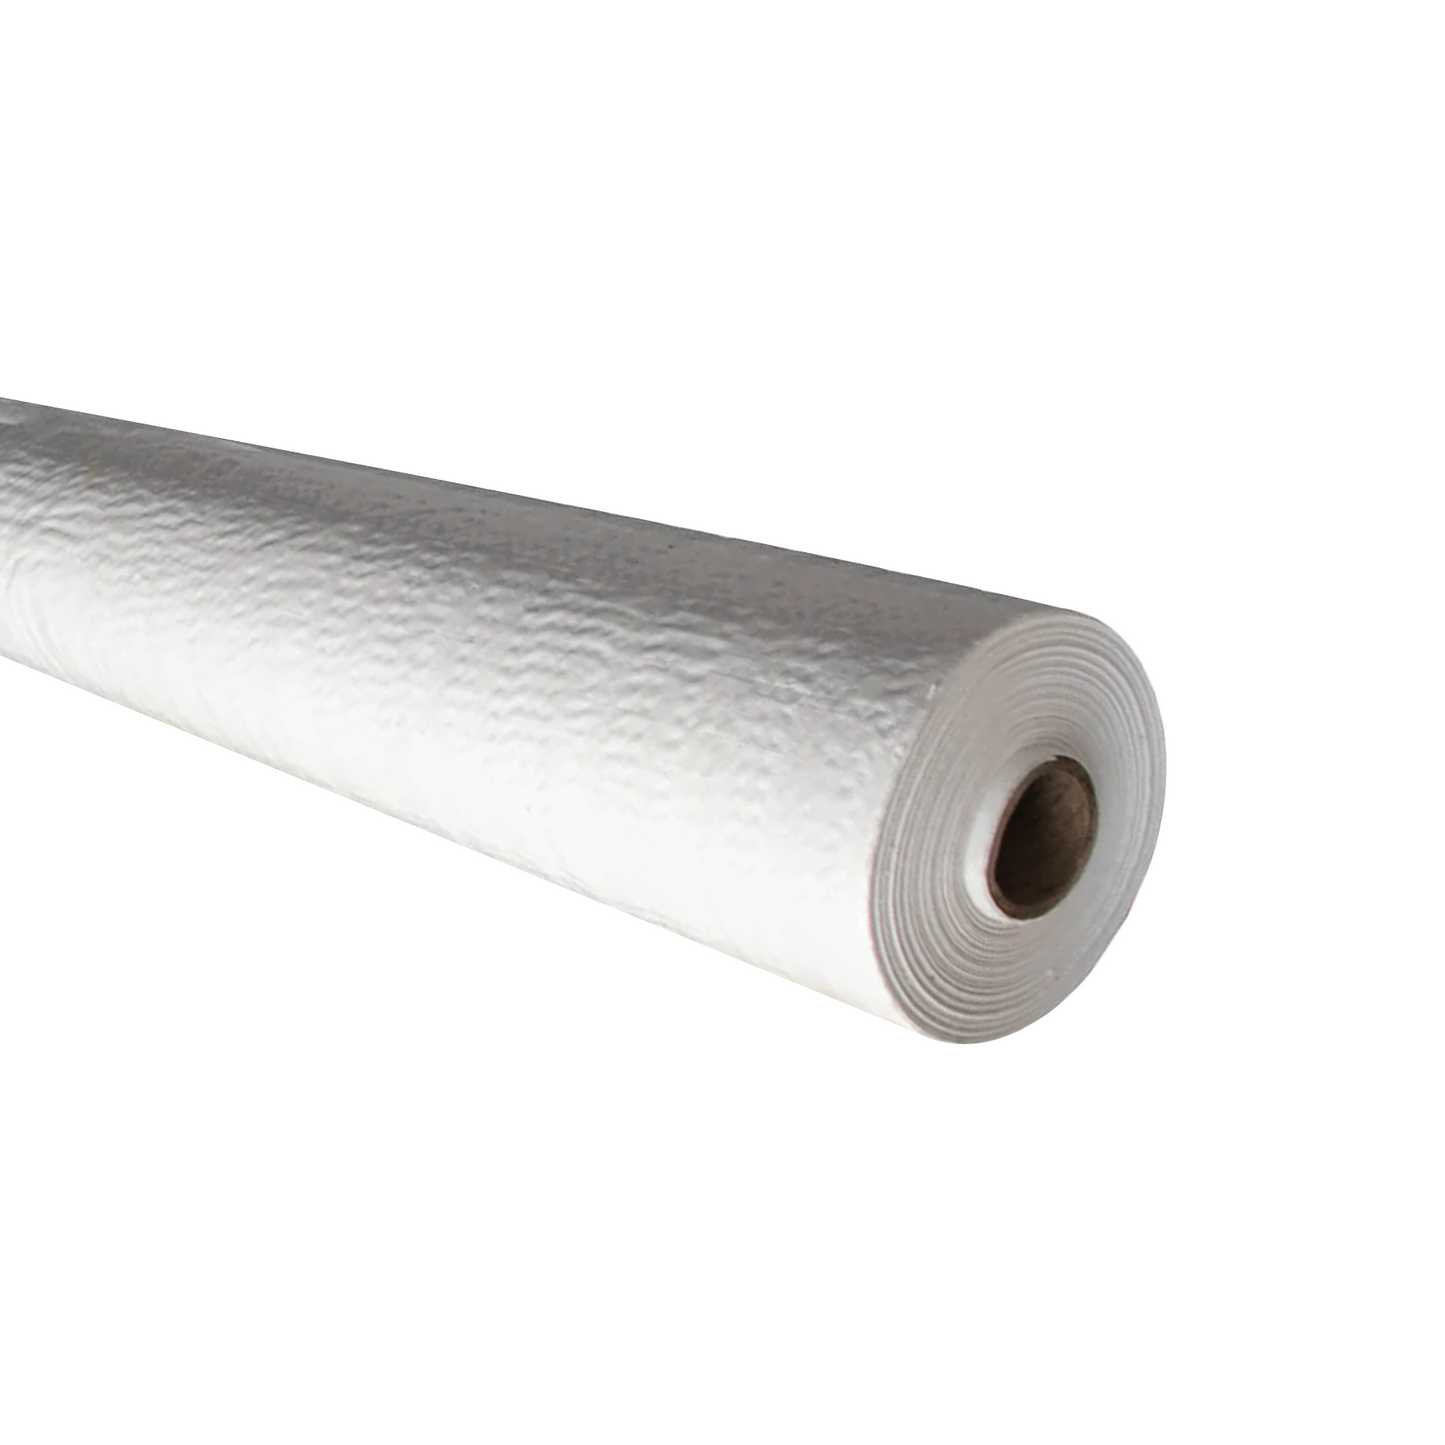 Polyweave Protection Cover Roll - 16Kg, 4.0m x 50m (thickness: 80gsm)